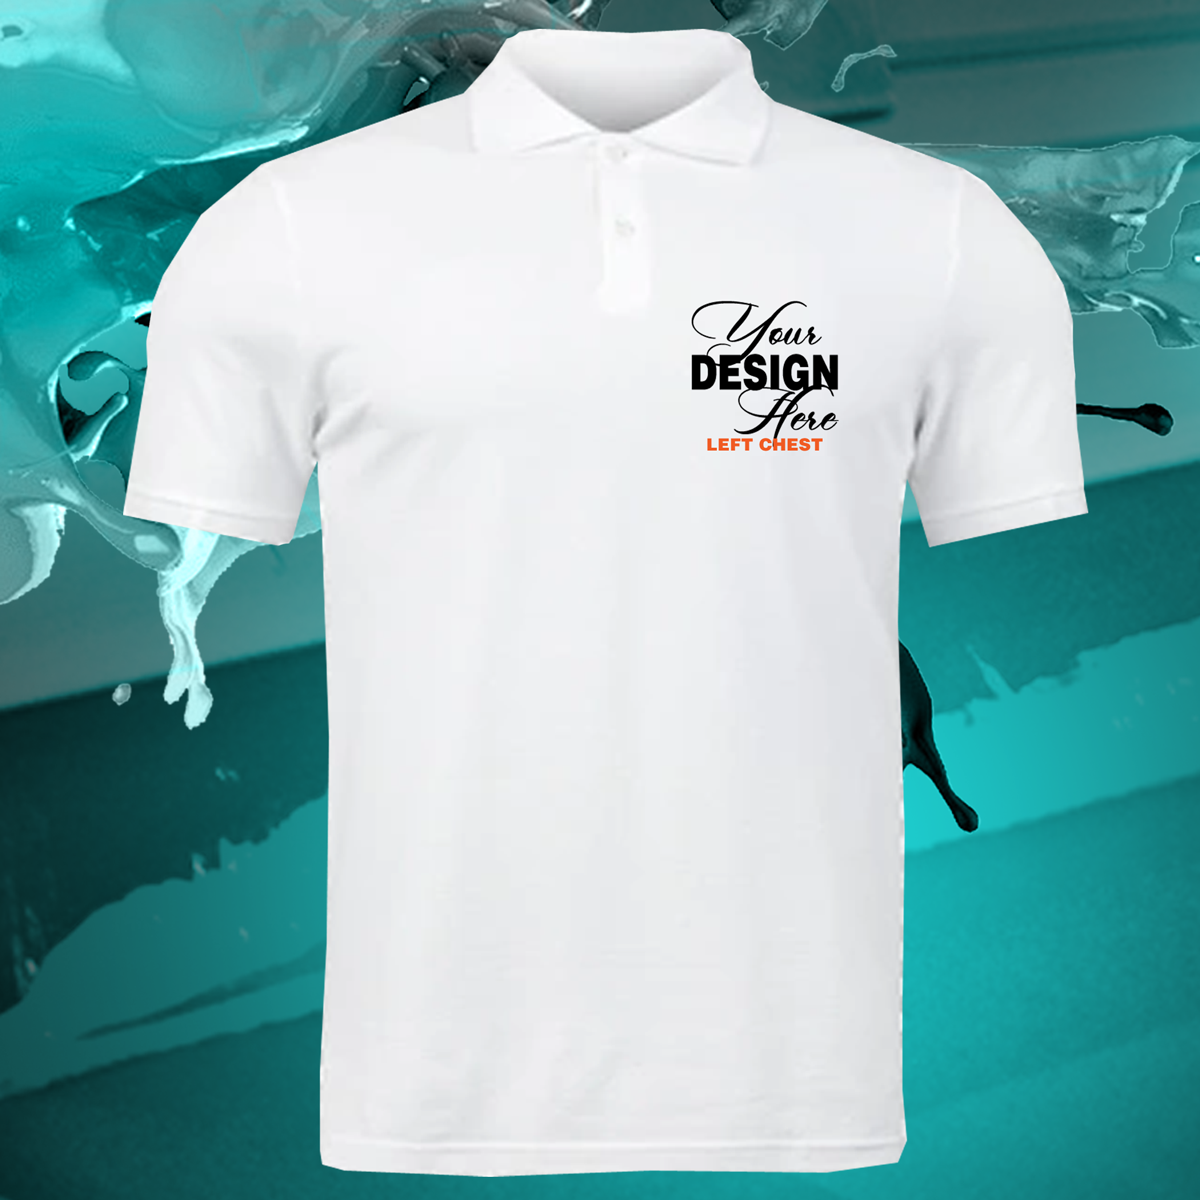 Custom Youth Polo Shirt great for School Uniforms - Wilson Design Group